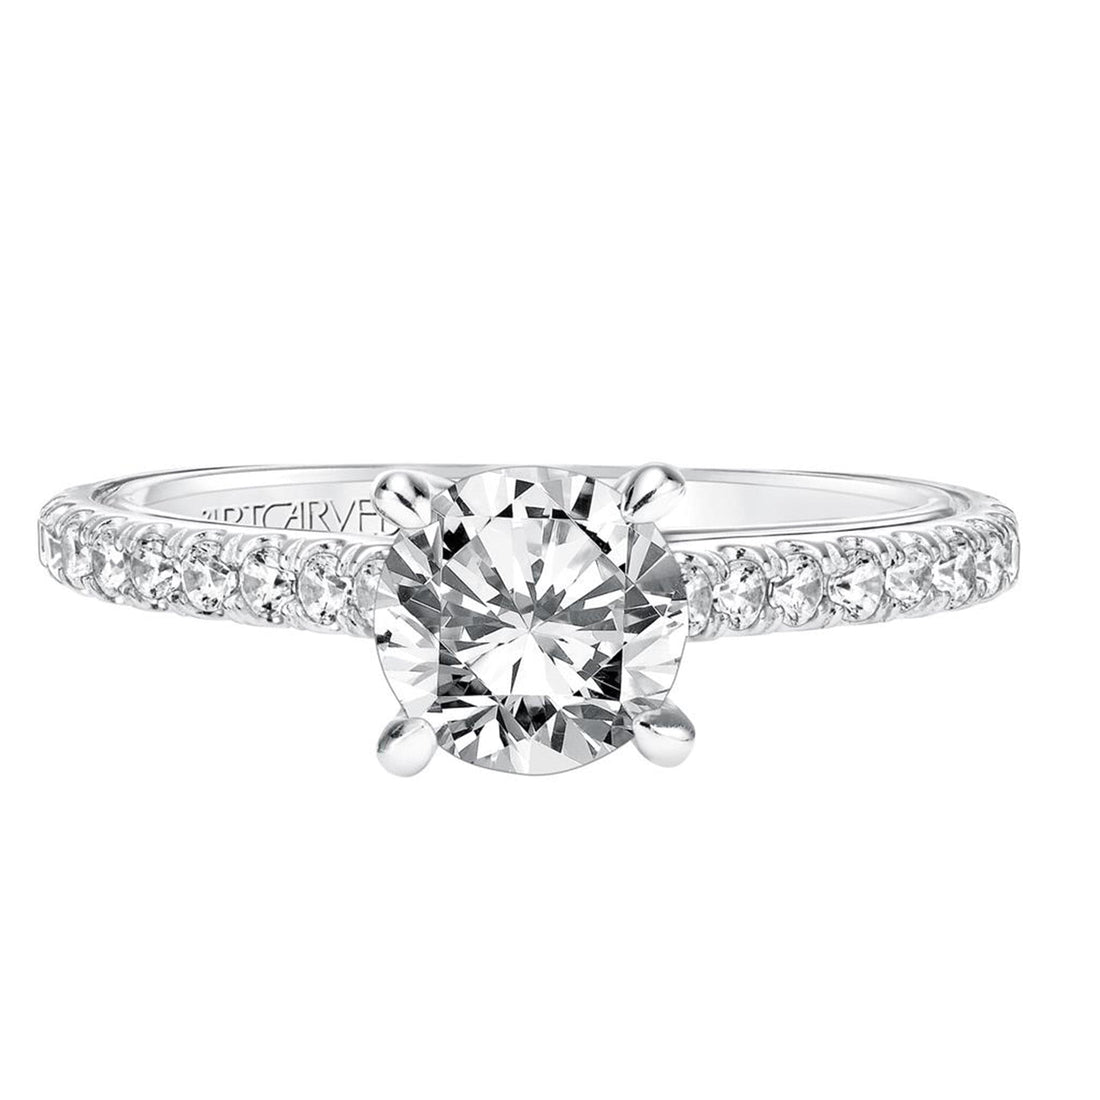 Diamond Sidestone Twist Gallery Engagement Ring in 14k White Gold Front